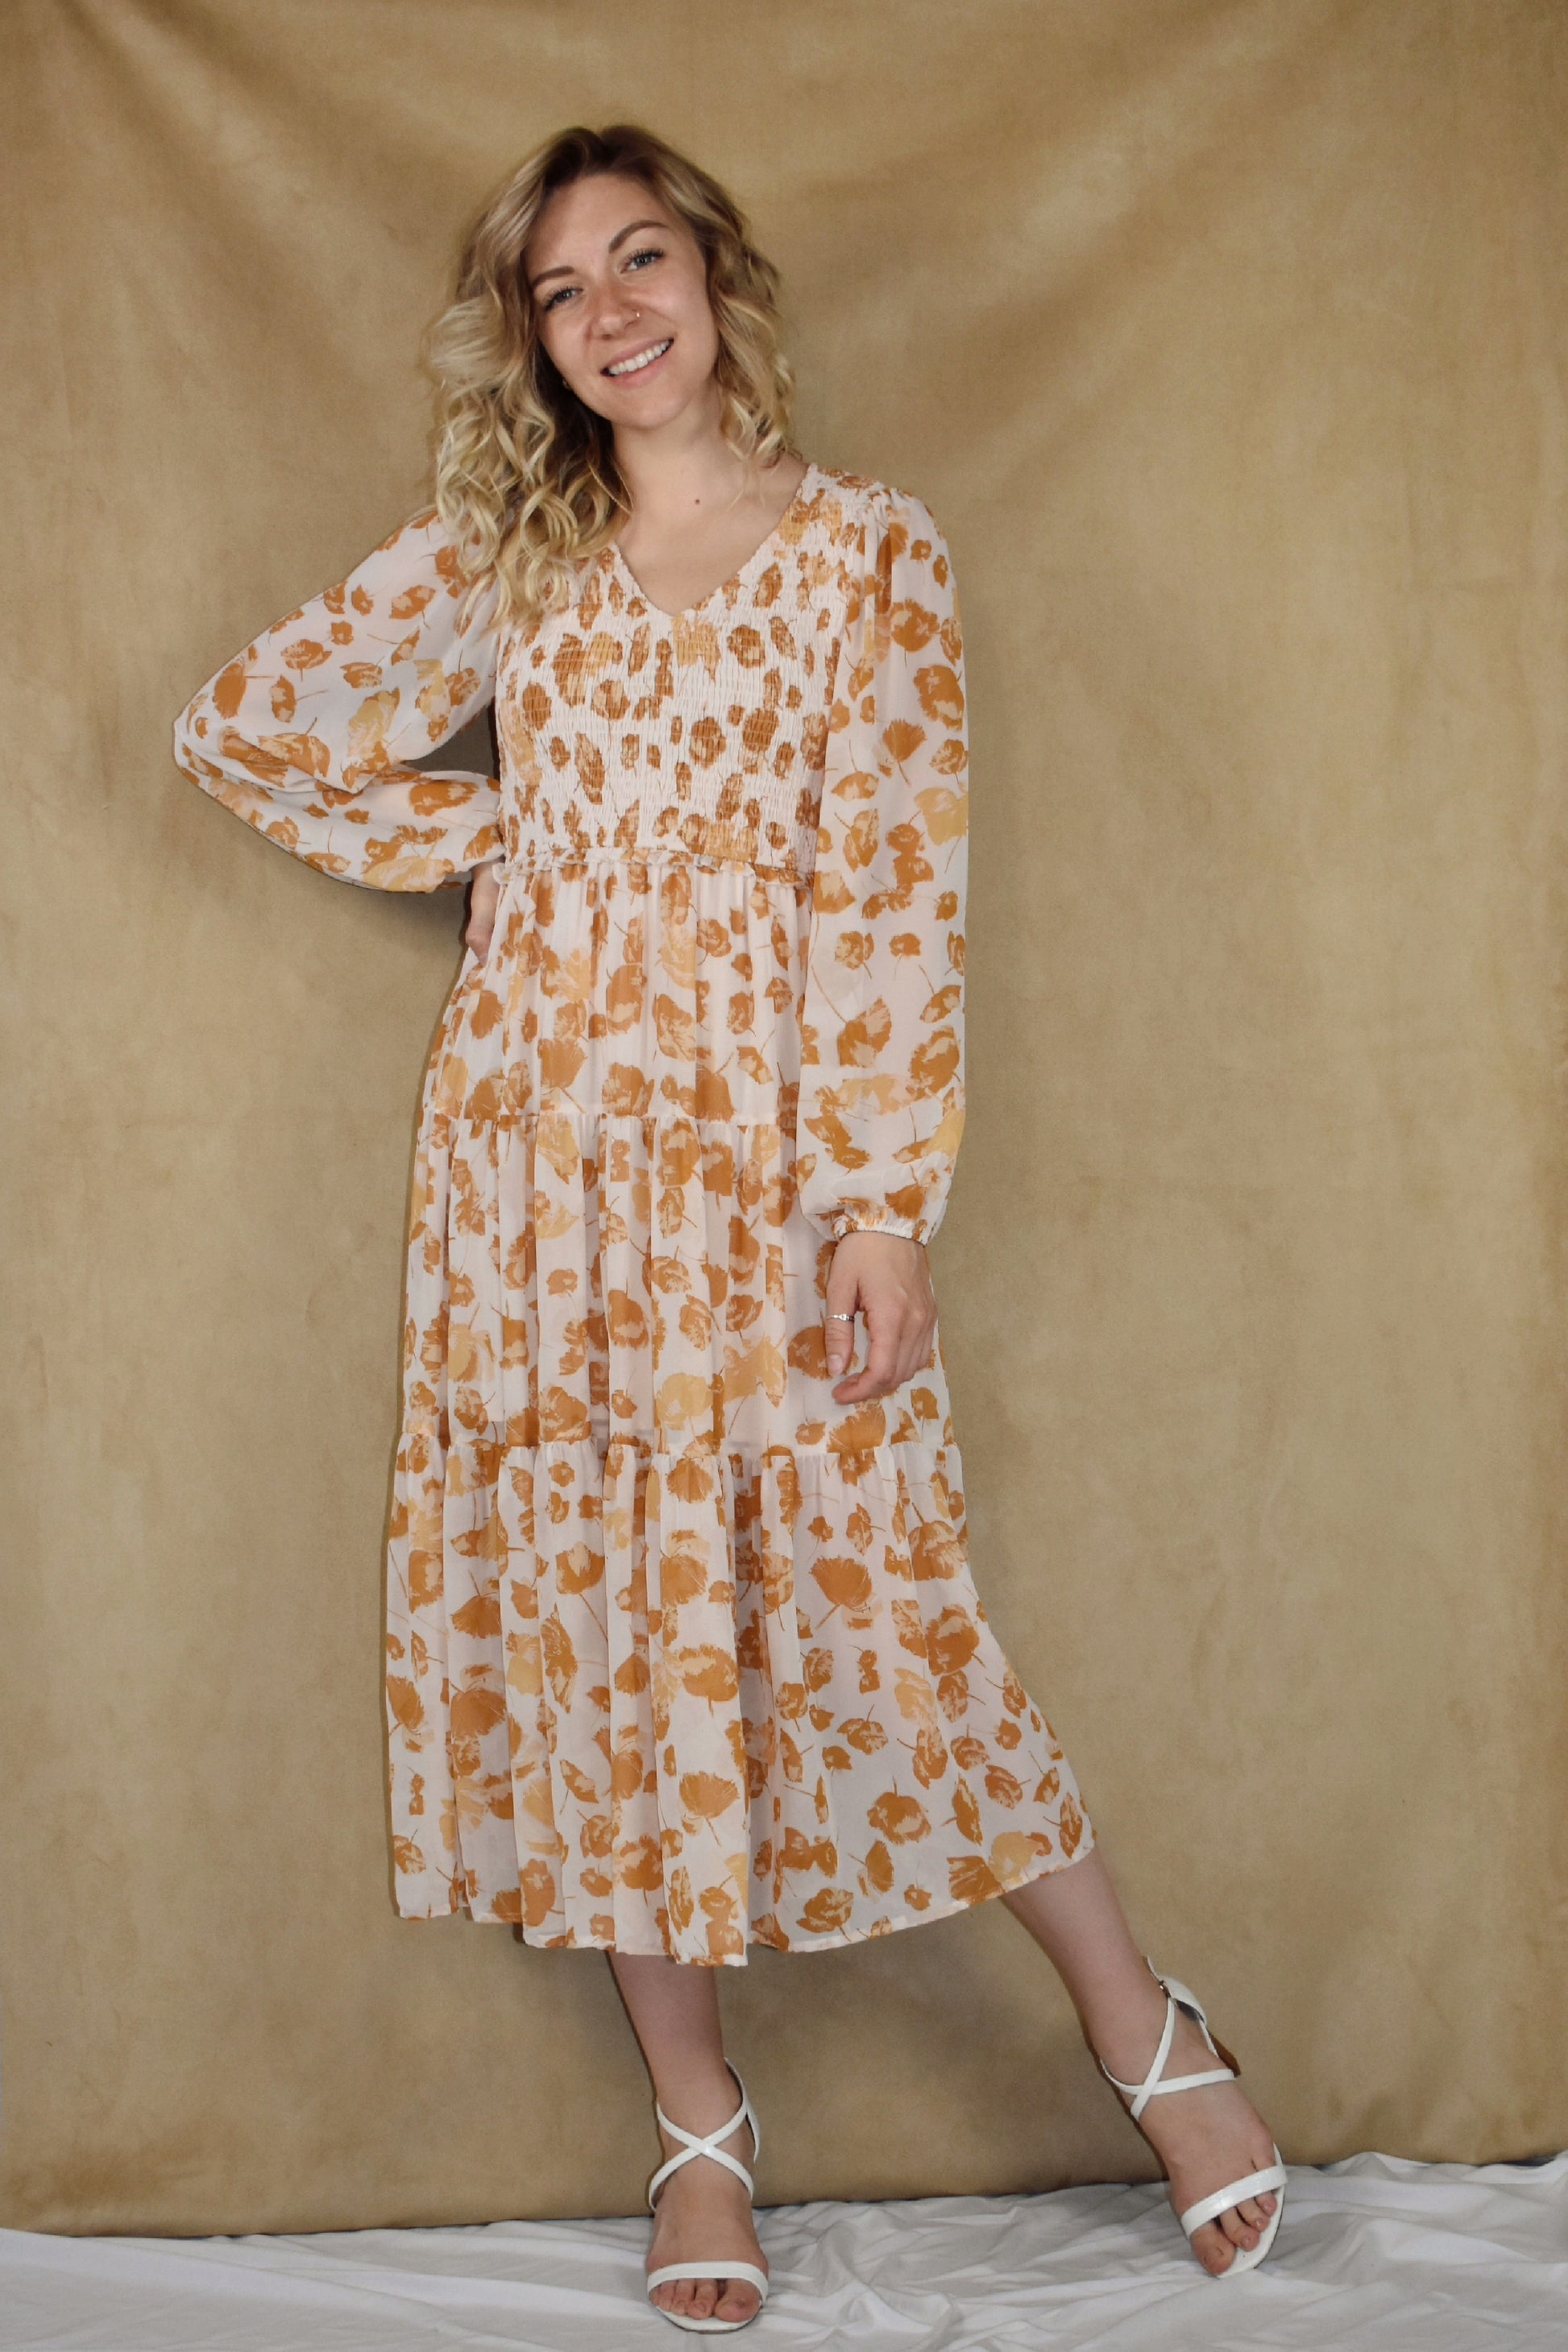 long sleeve midi dress with v neck. printed chiffon fabric infused with flower petals. tiered skirt and smocking detail on bodice. cream and mustard colors.